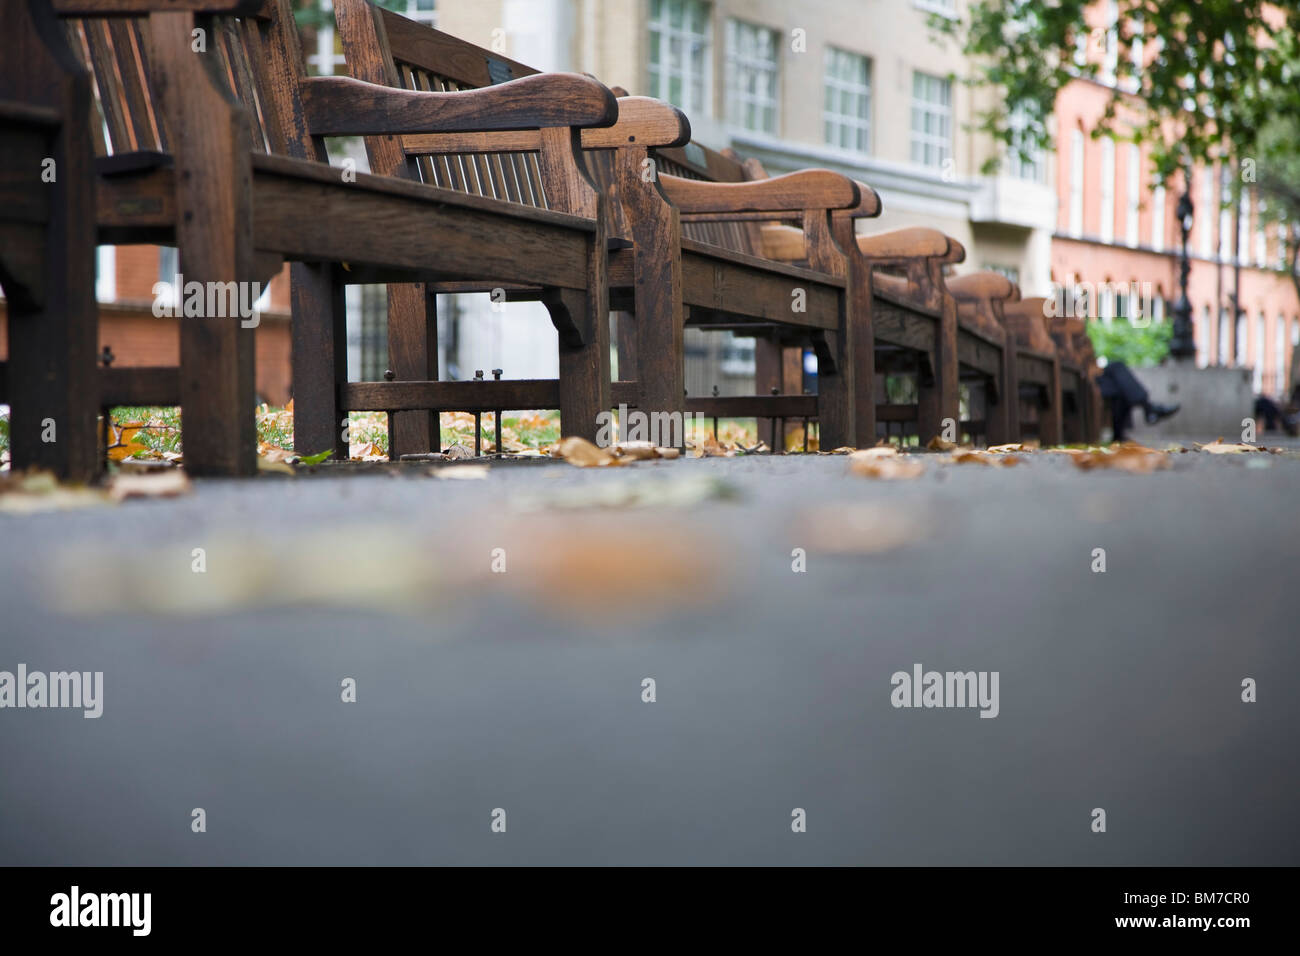 Low view of wooden benches in a park Stock Photo